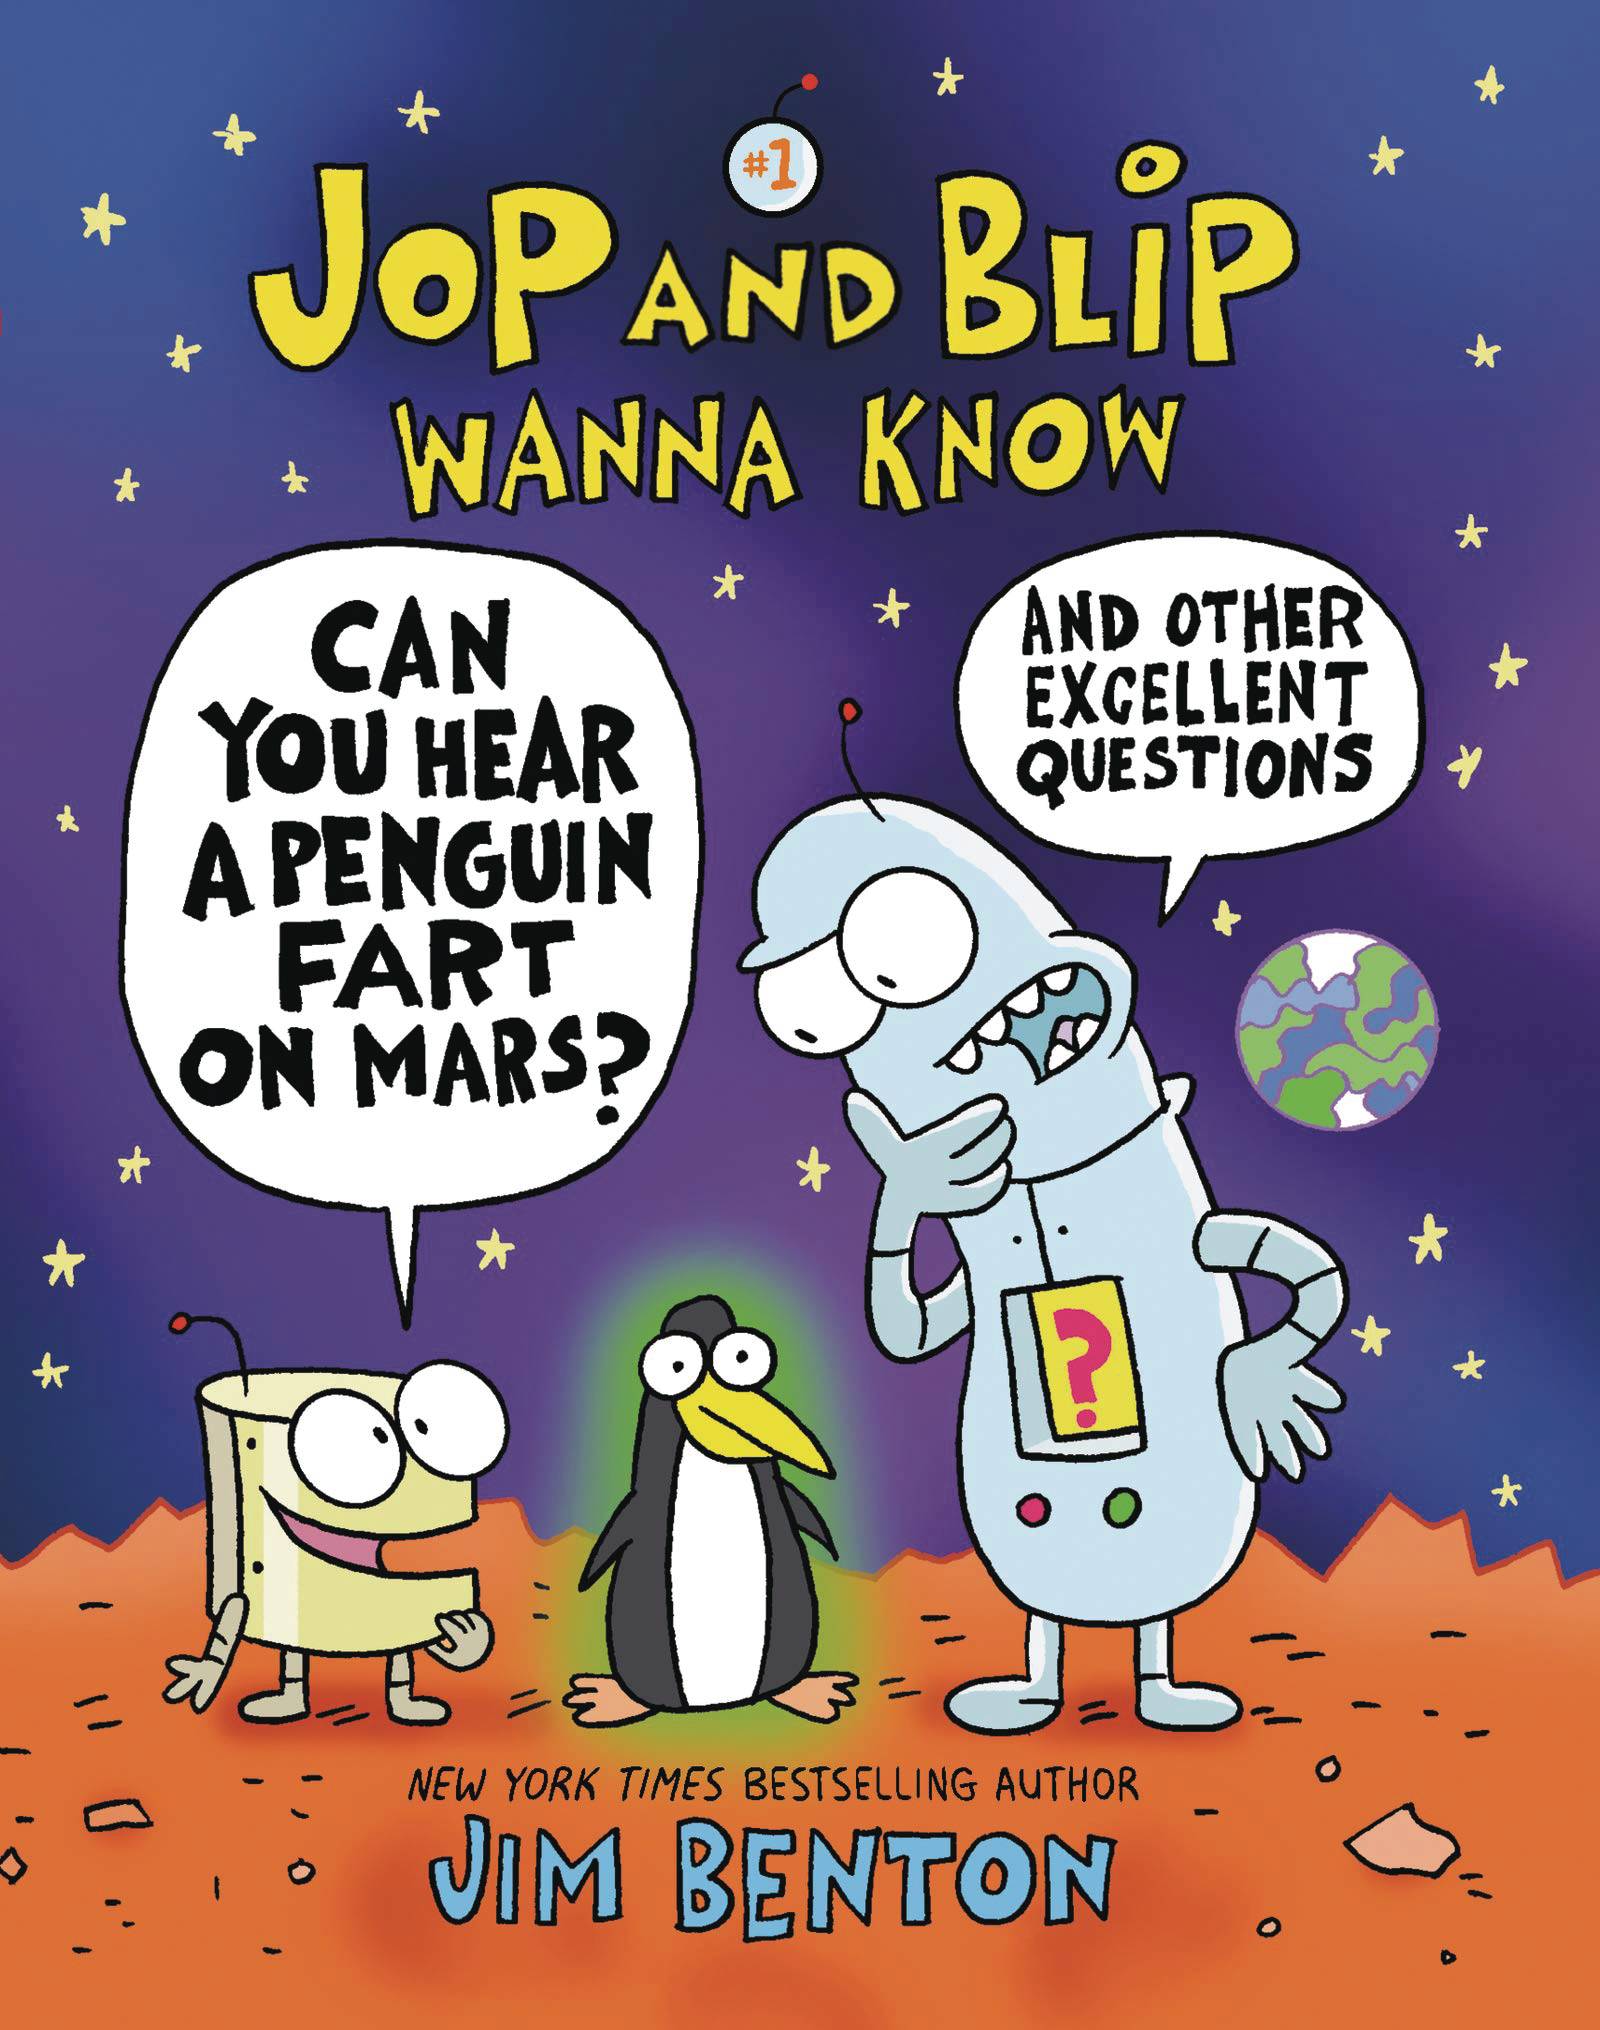 JOP AND BLIP WANNA KNOW TP CAN HEAR PENGUIN FART ON MARS